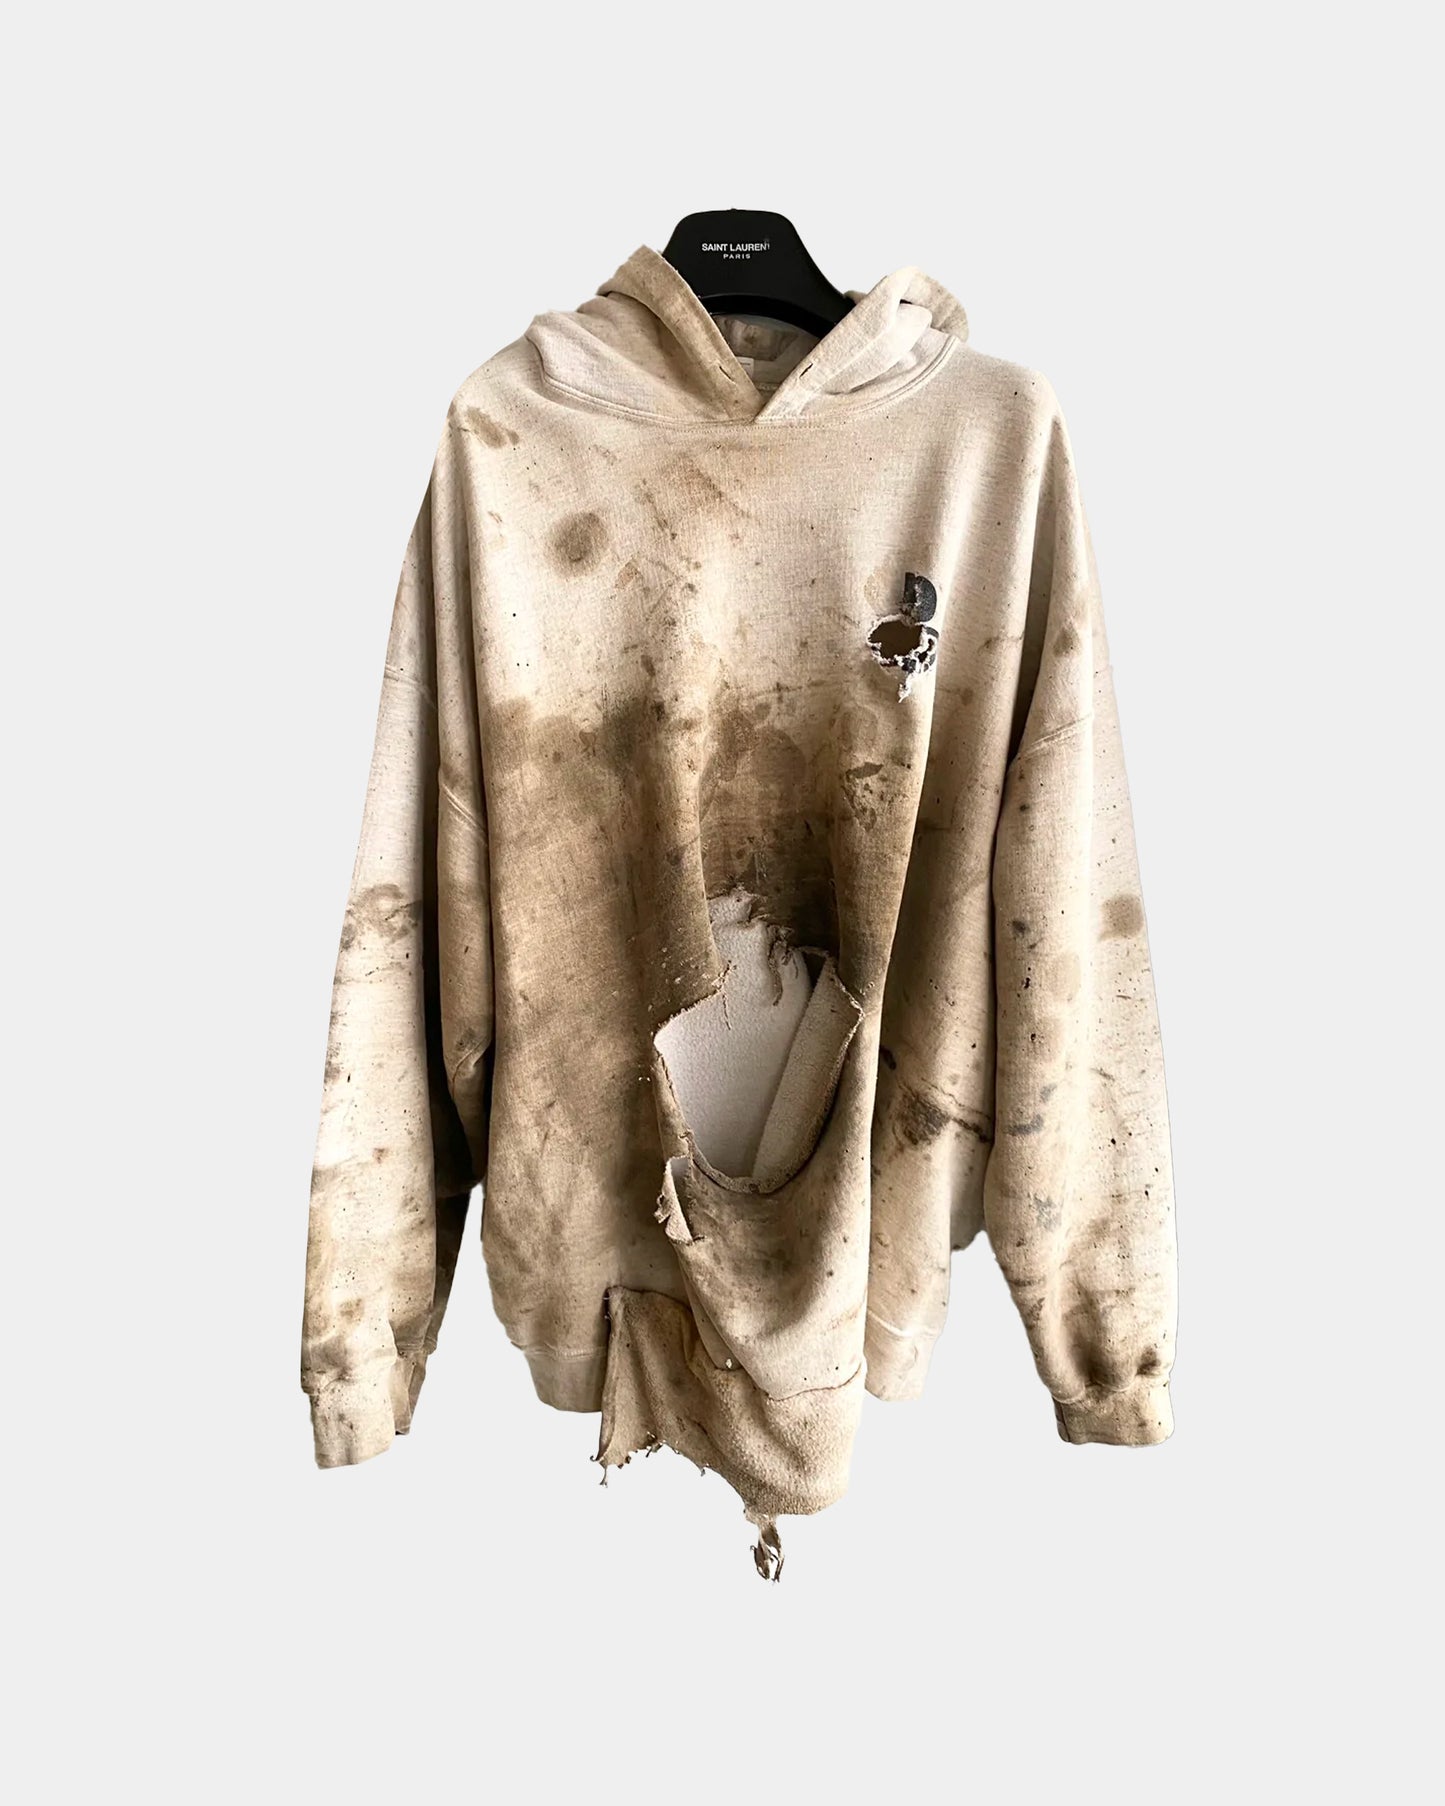 THRASHED FUCKING DESTROYED OIL SPILL HOODIE SWEATER